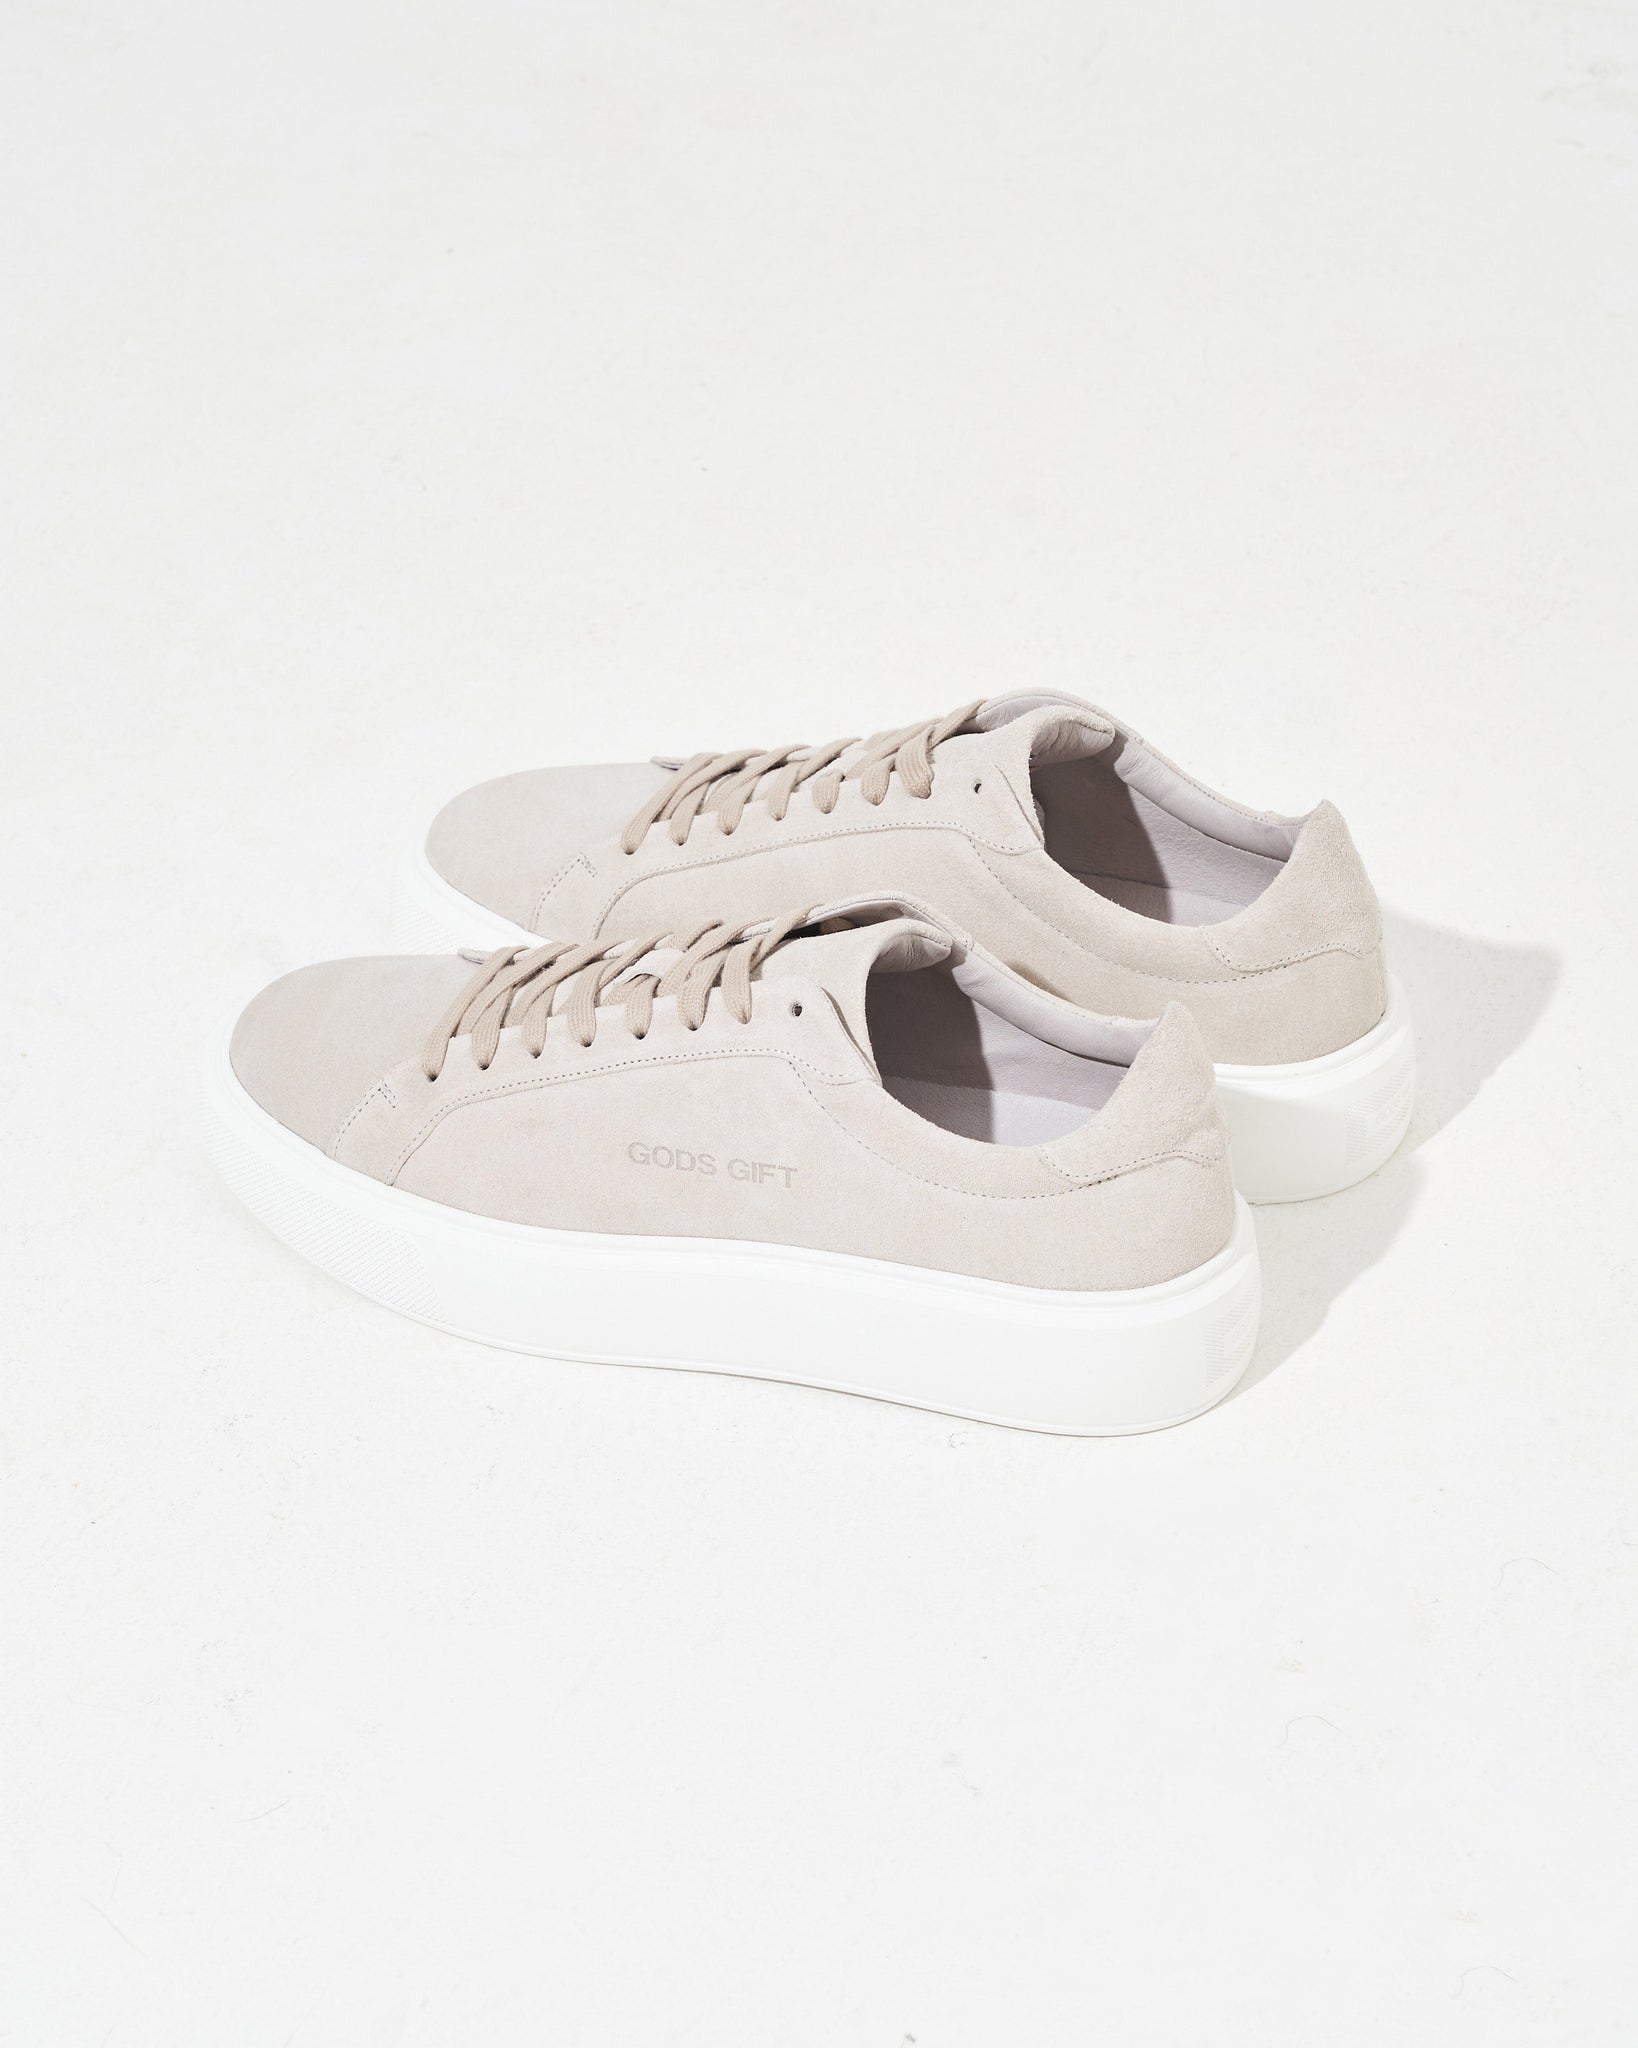 Groves Suede Shoes in Light Grey